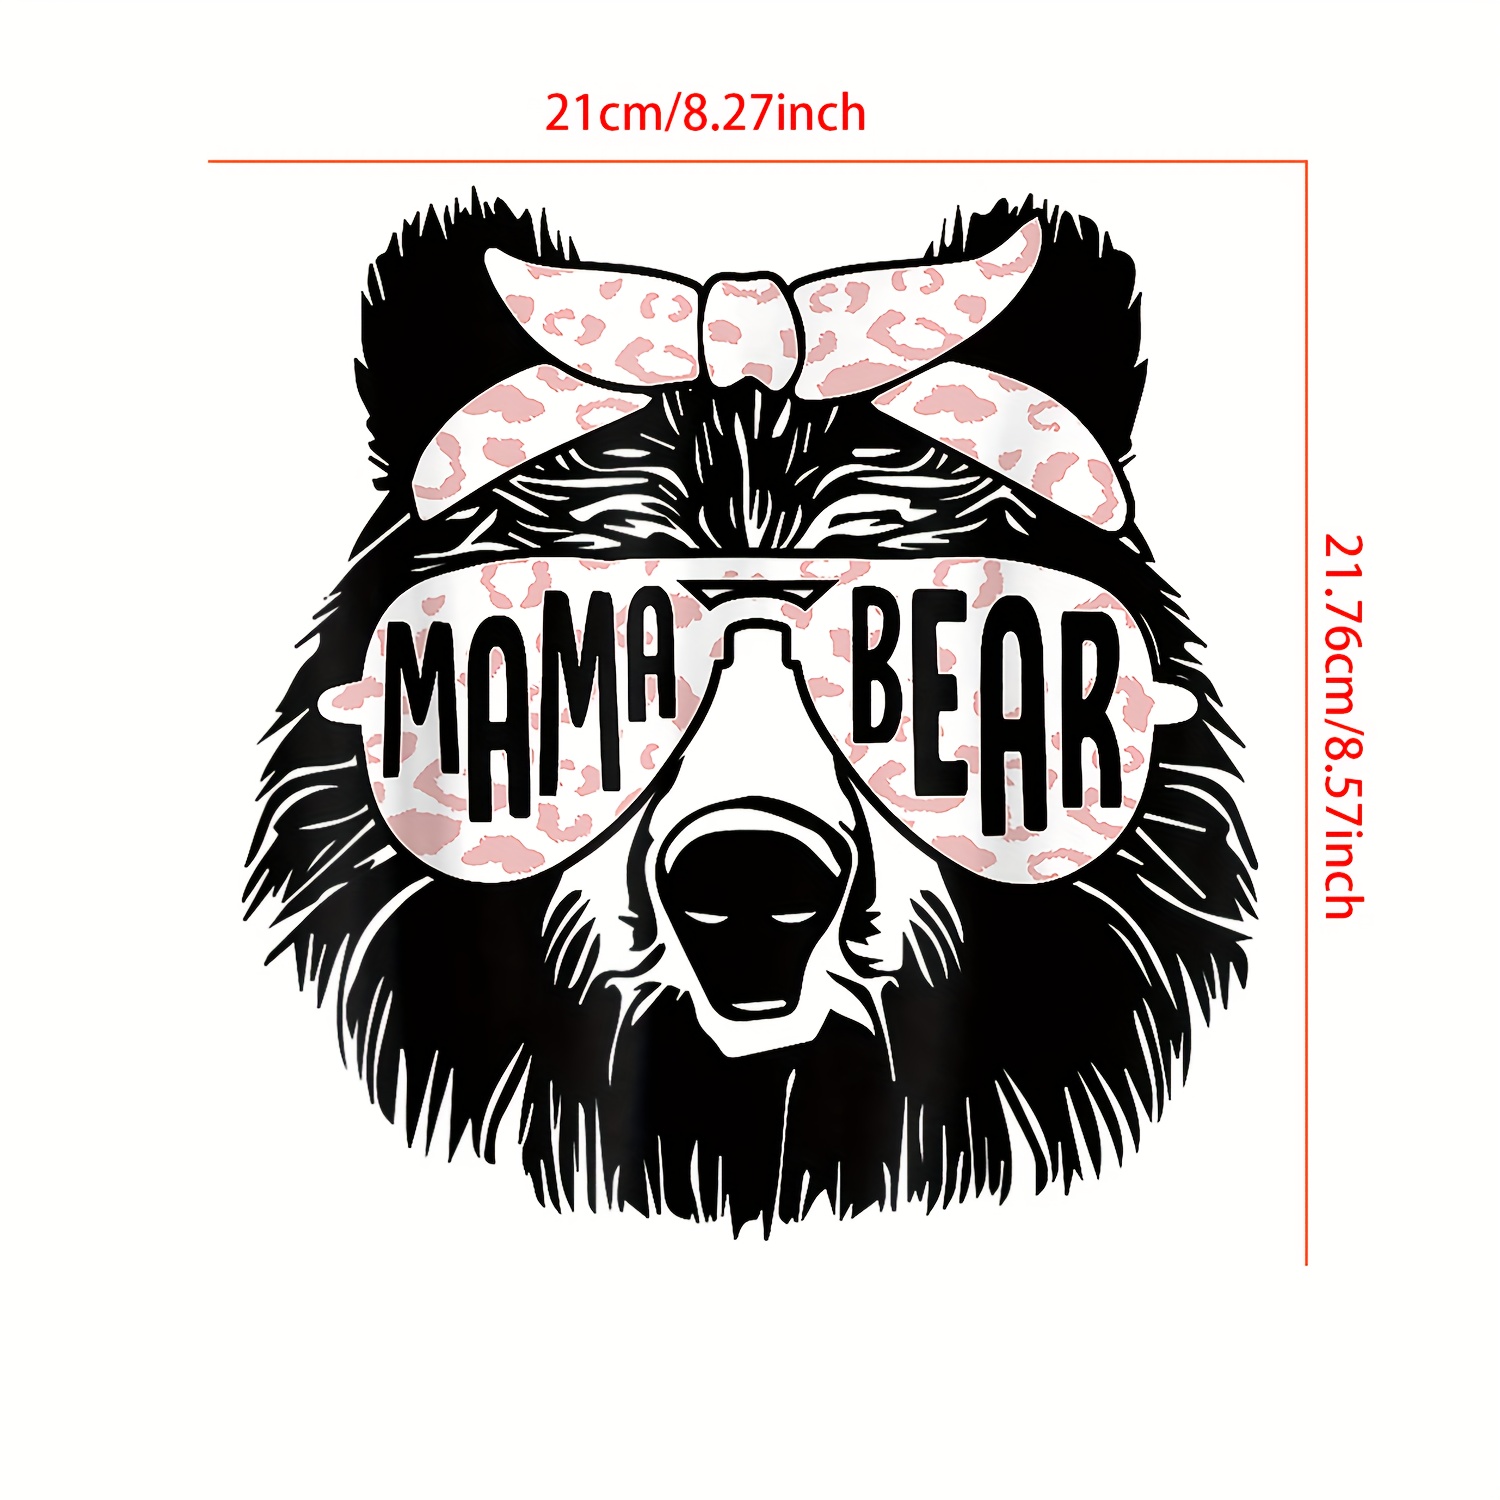 Mama Bear Children's clothing and accessories – Mama Bear